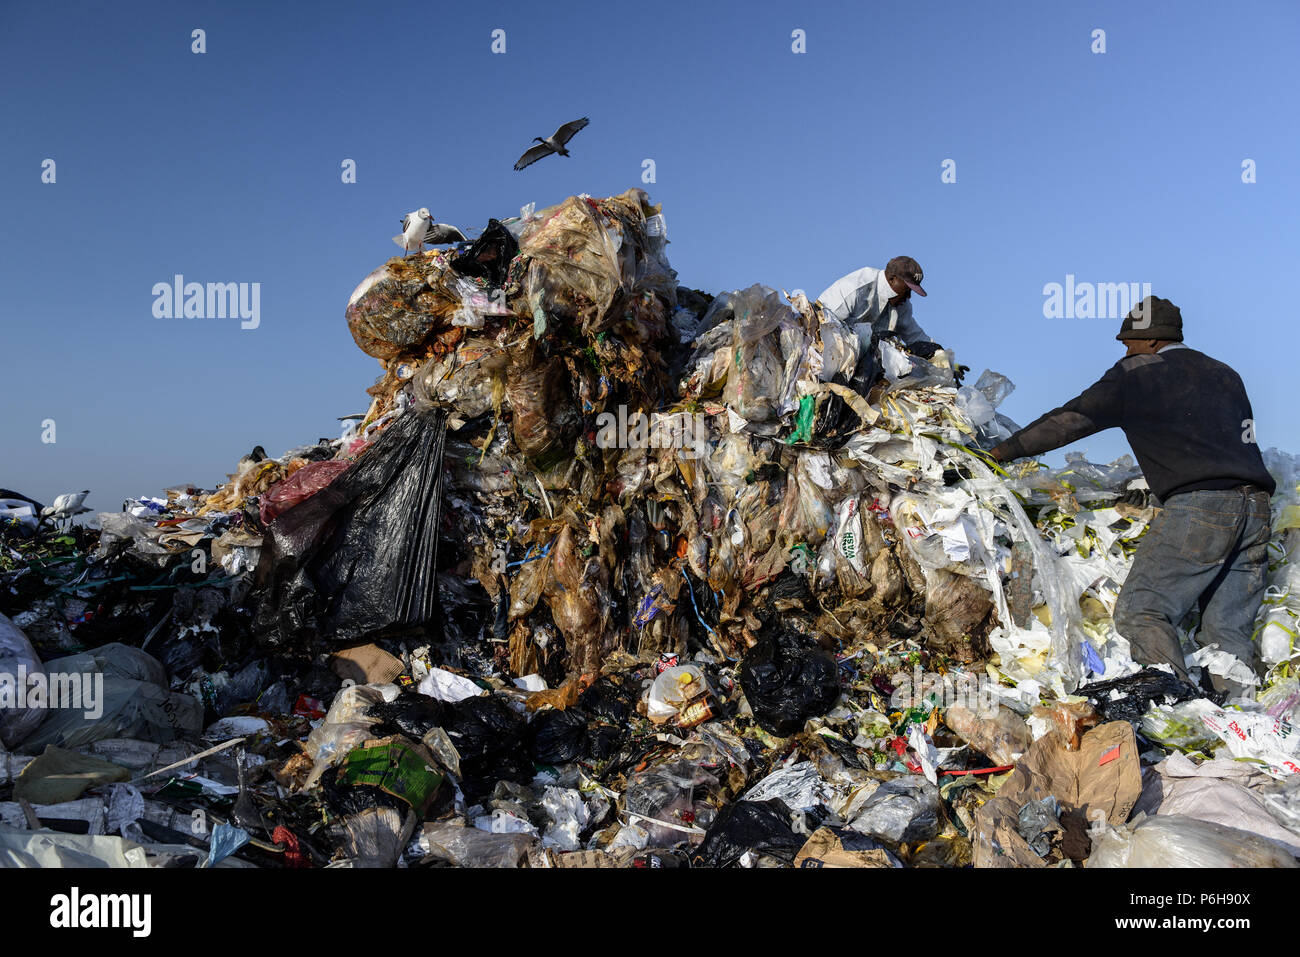 Pickers sort through a mound of plastic at the Robinson Deep landfill in South Africa's commercial capital of Johannesburg Stock Photo